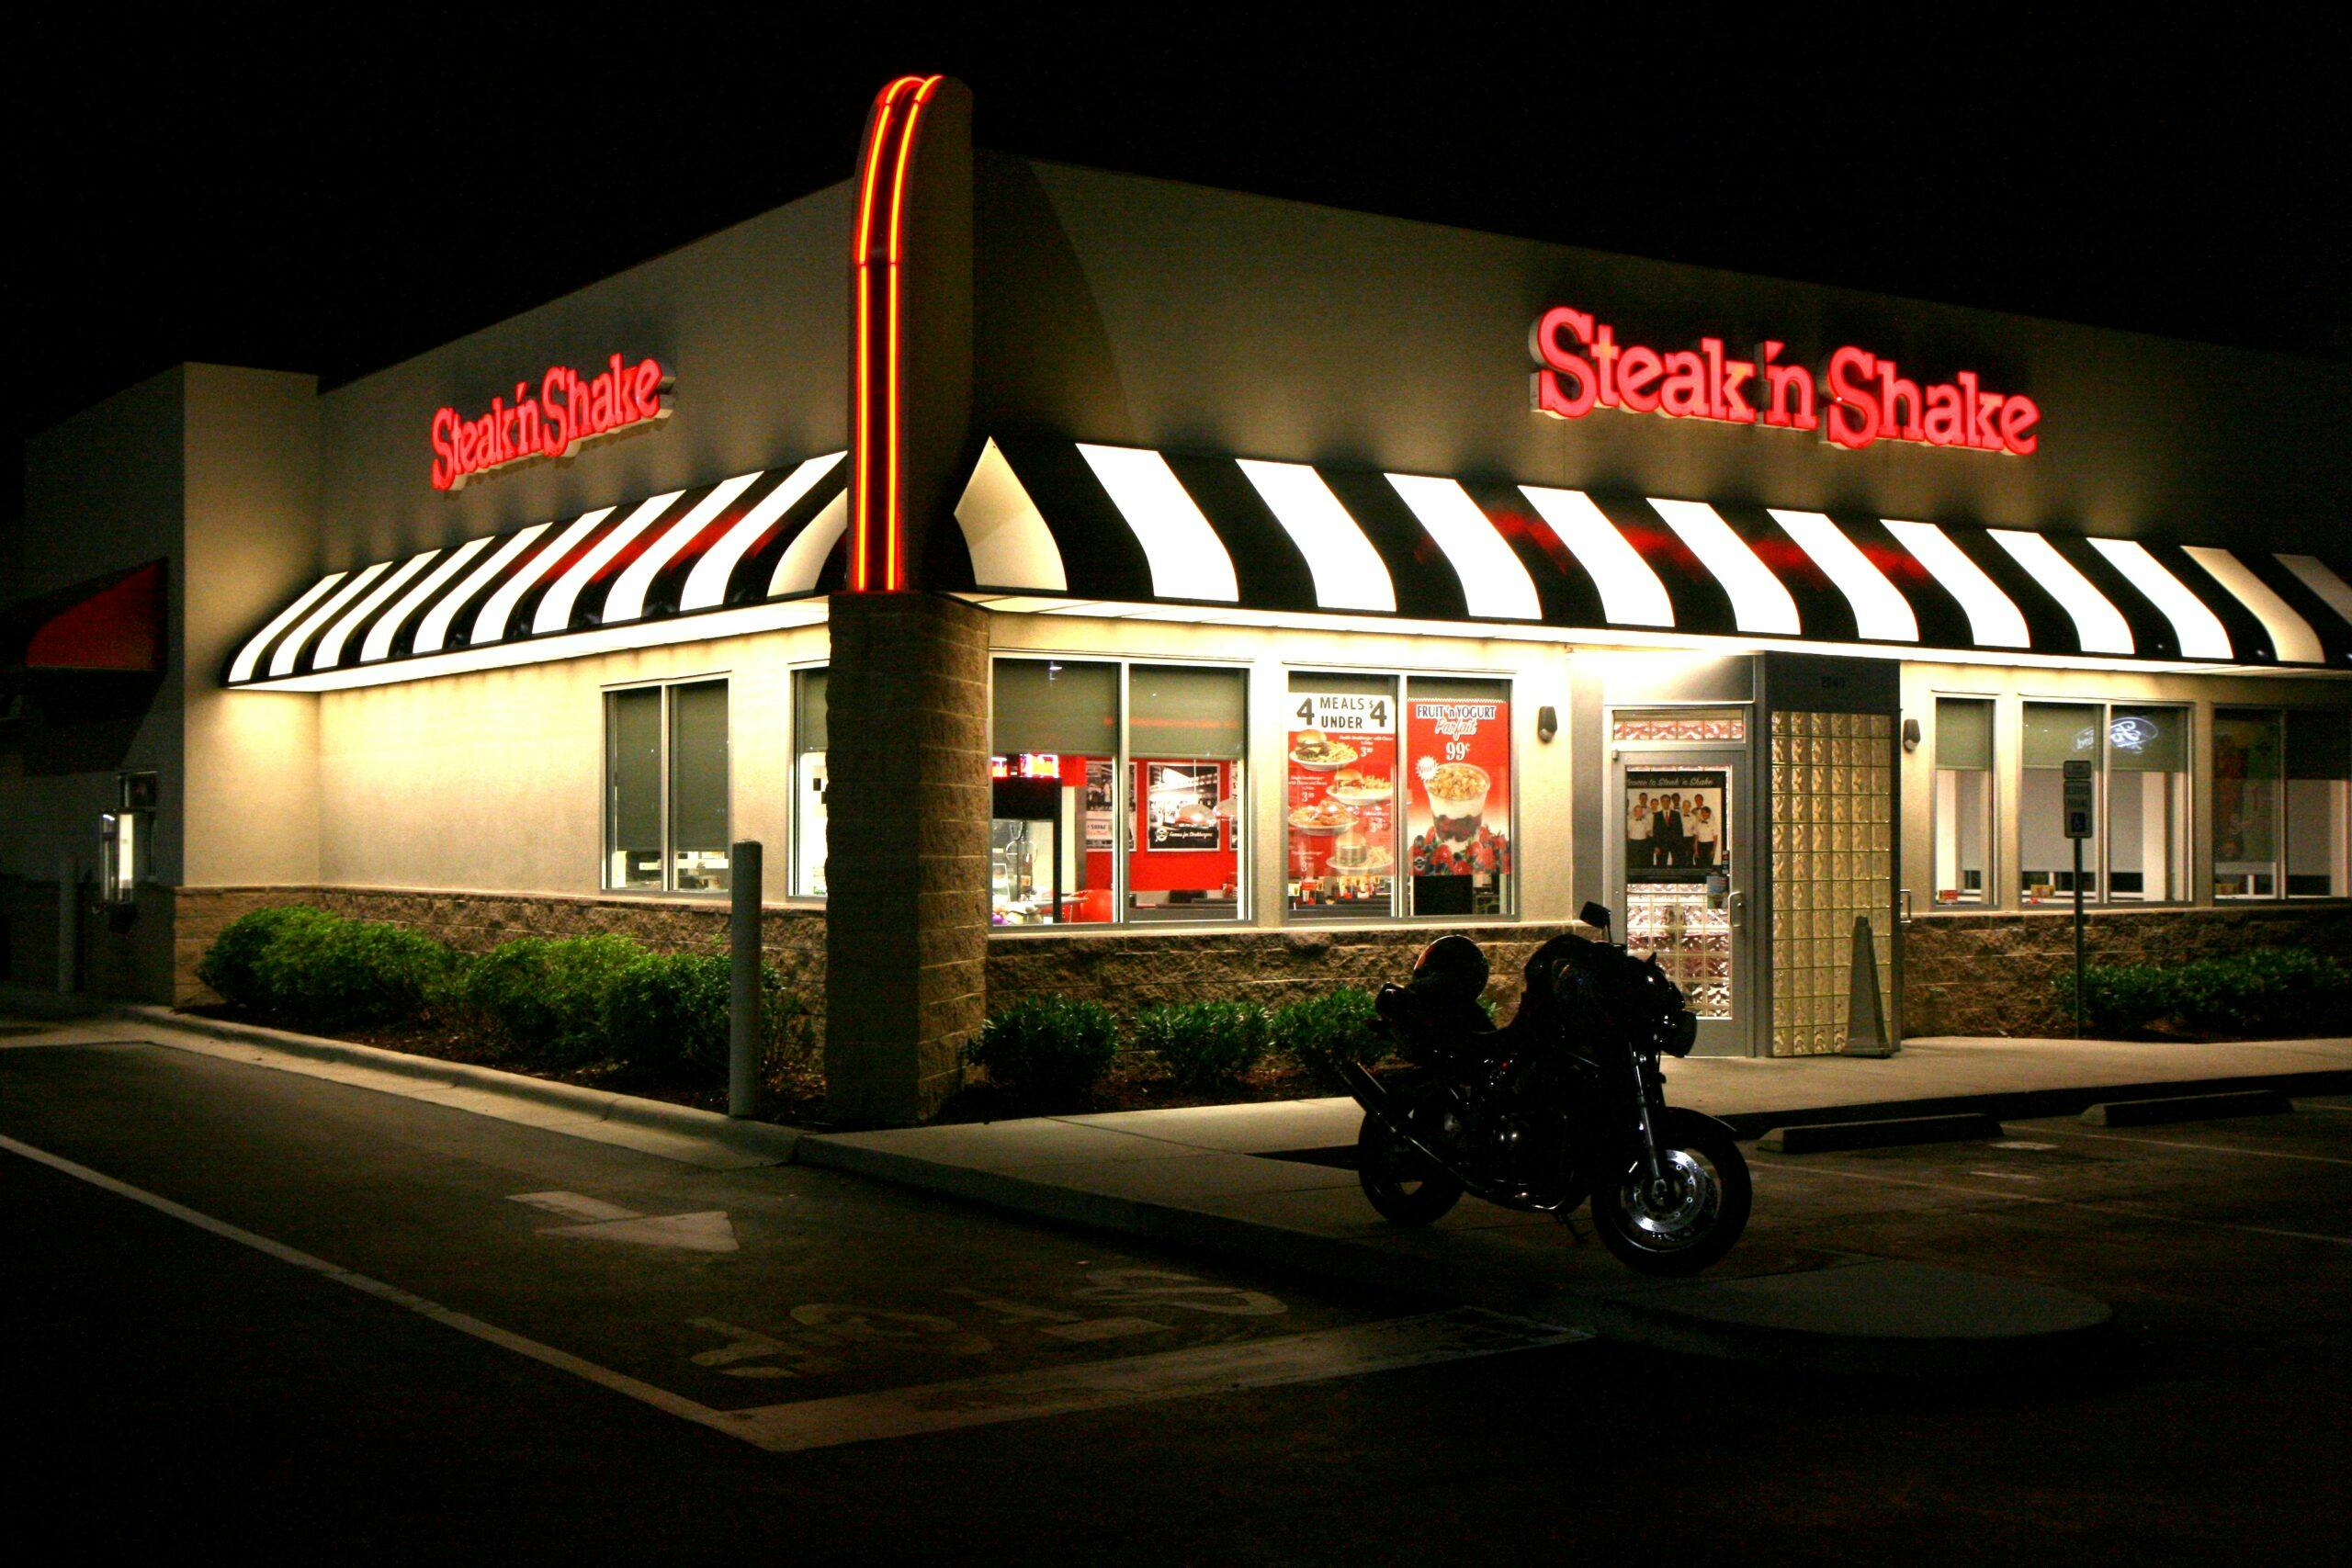 ‘I’m going to buy their meal and take it’: Guy at Steak ‘n Shake drive-thru gets revenge on rude customer behind him, buys their order and takes it with him